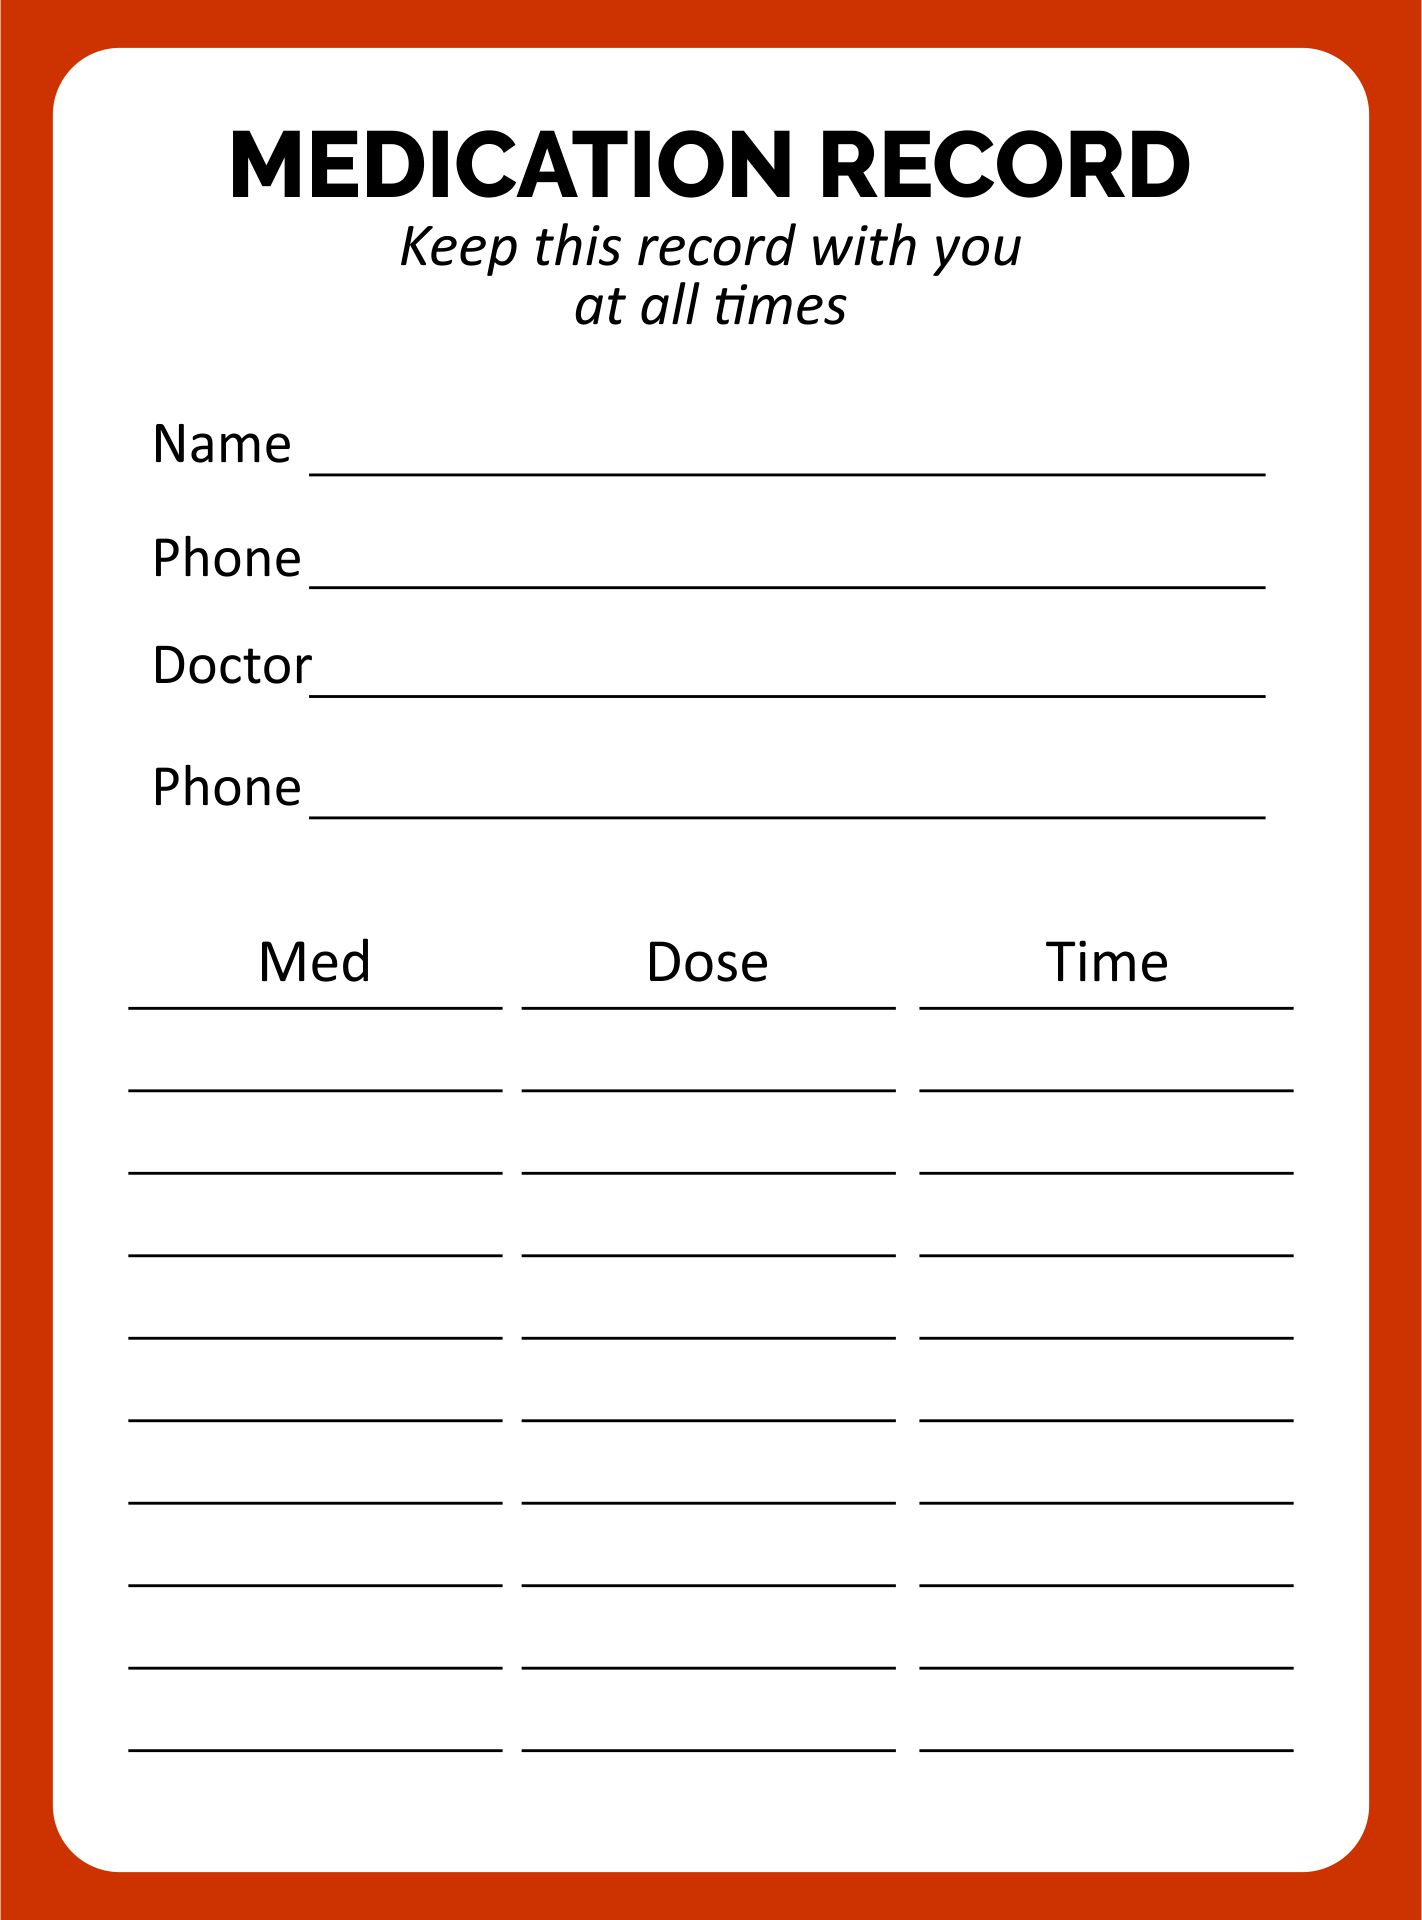 printable-medication-list-for-wallet-learn-about-the-medicines-you-take